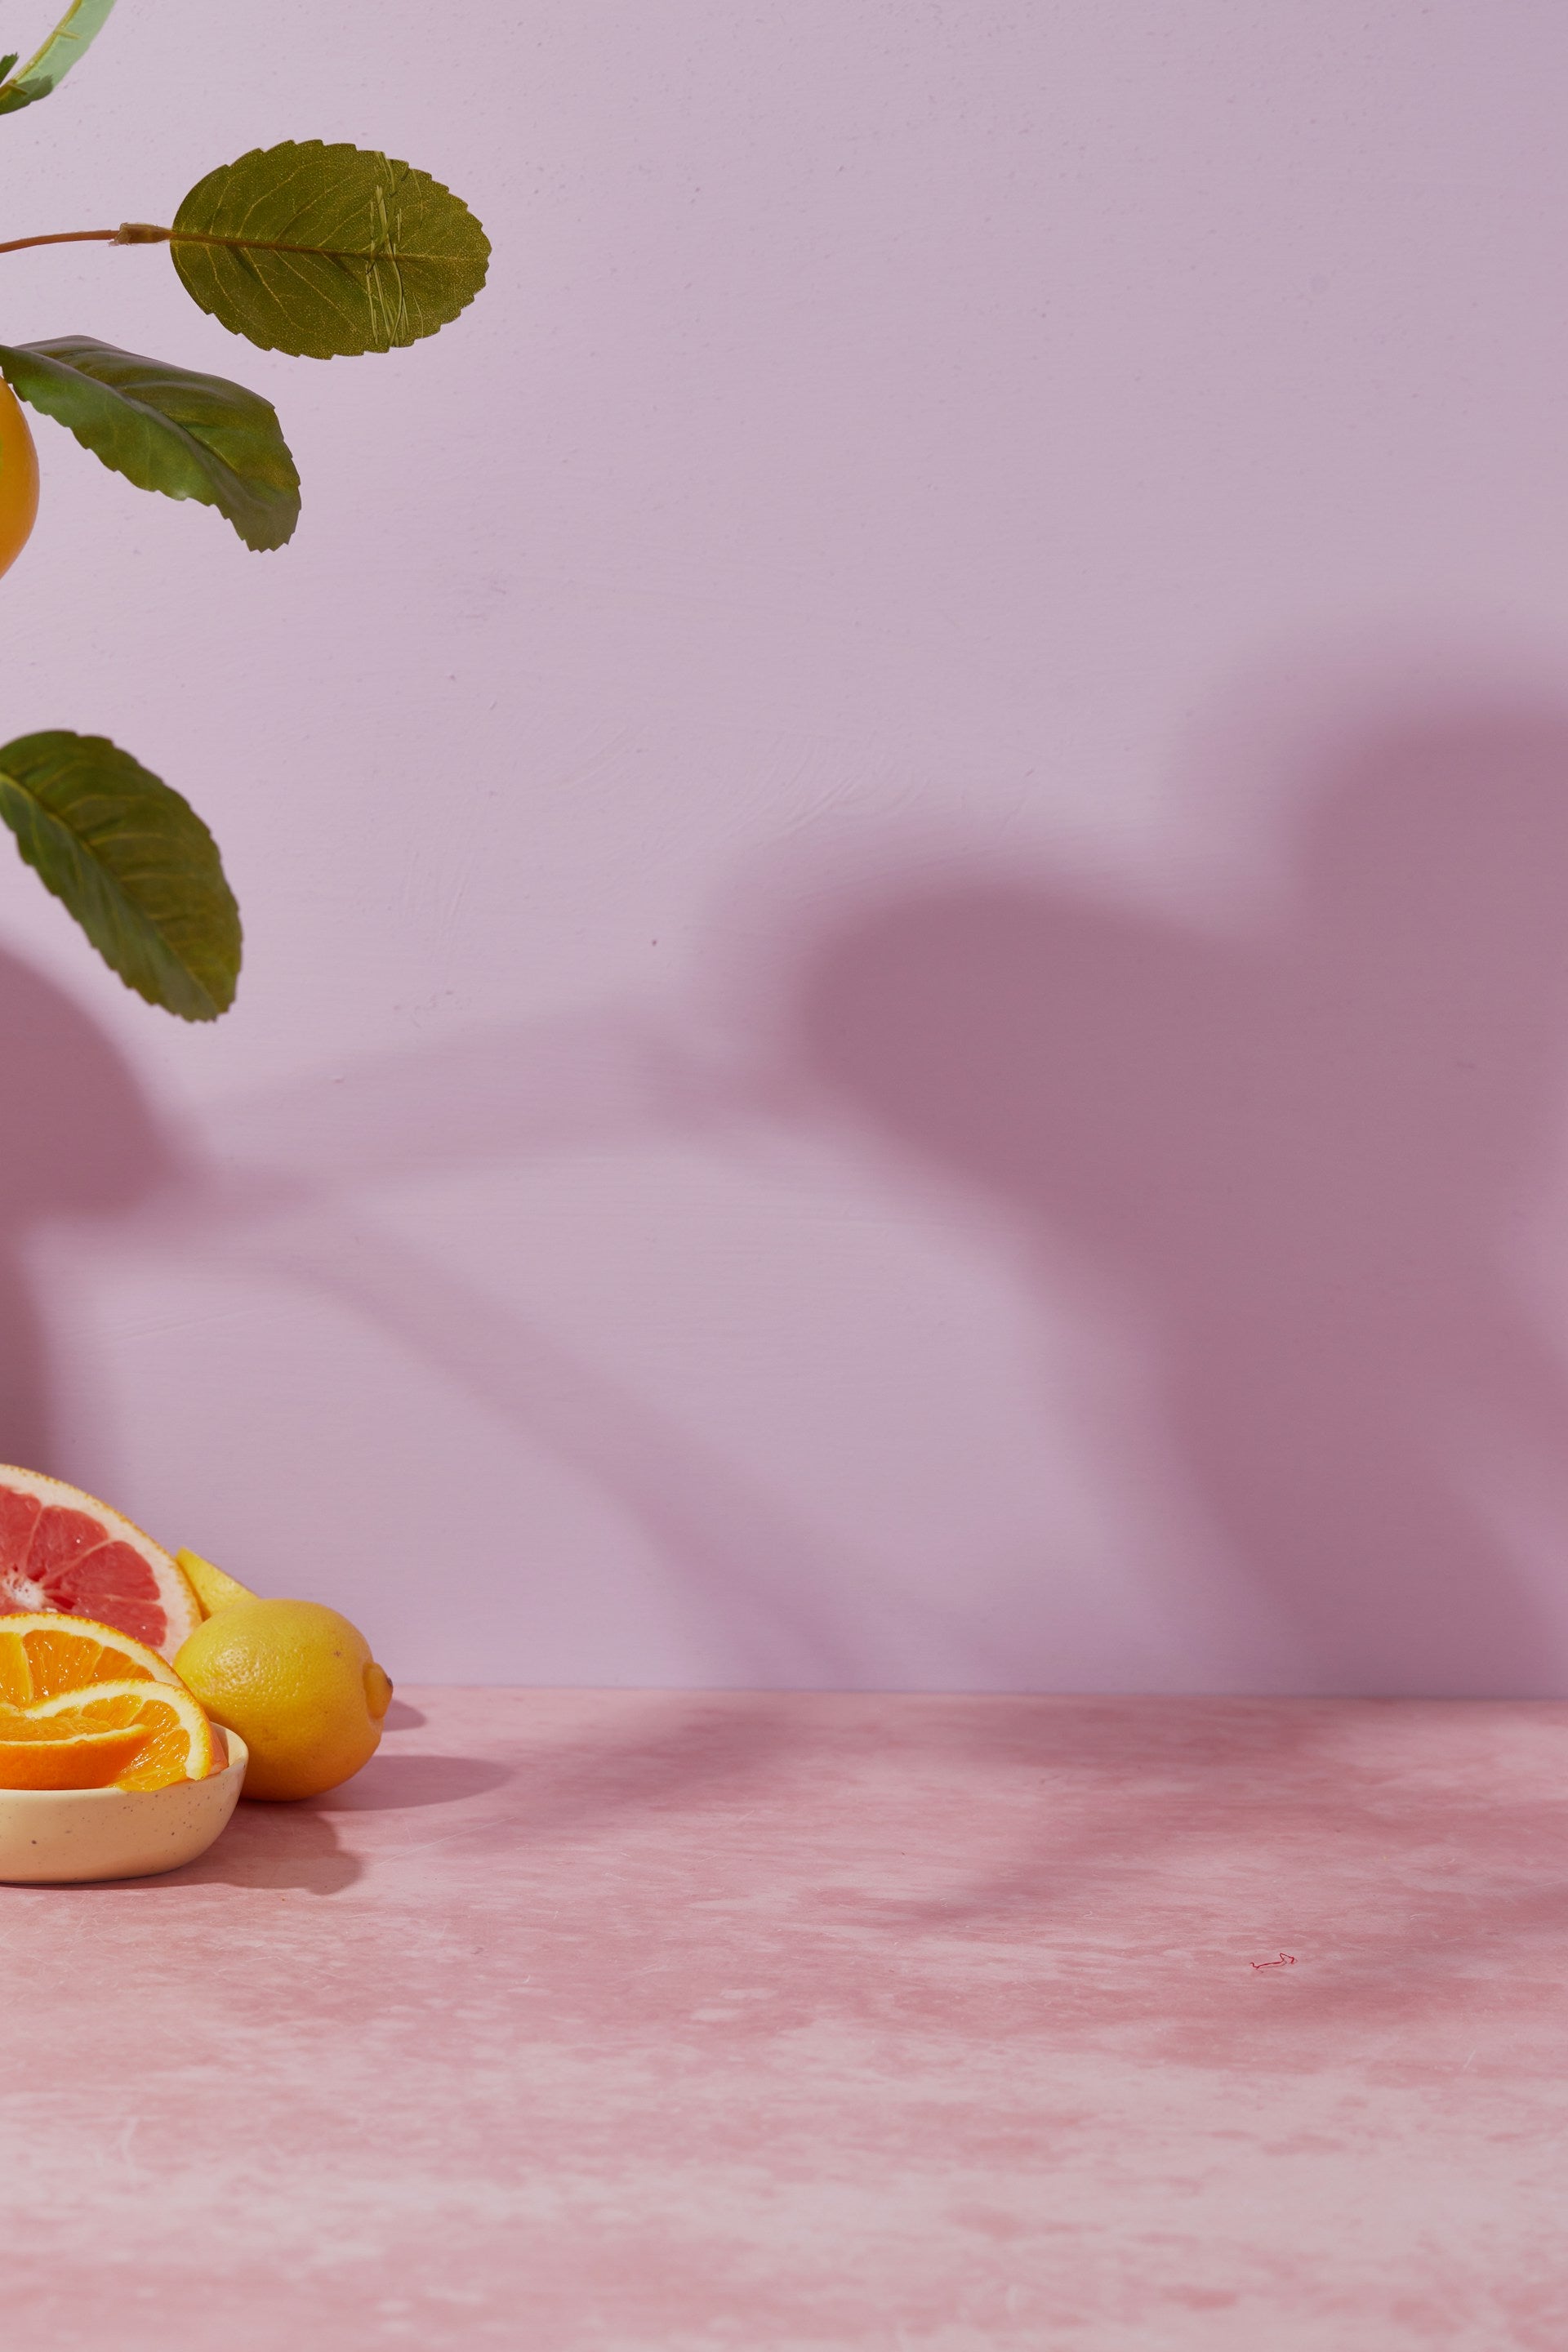 Citrus fruits and a shadow on a pink wall.